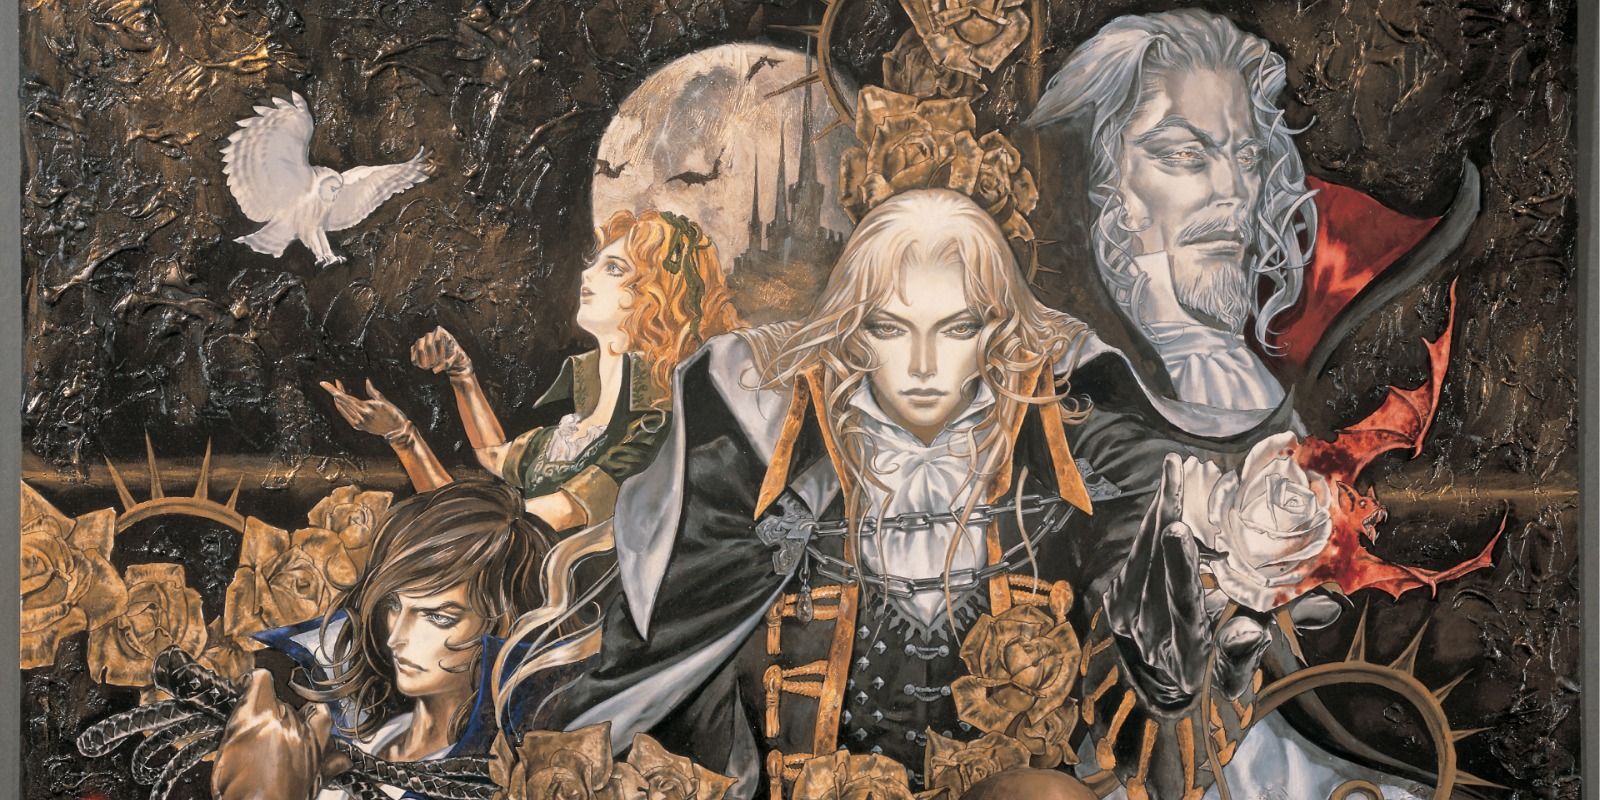 Art for Symphony of the Night, featuring the main cast of the story